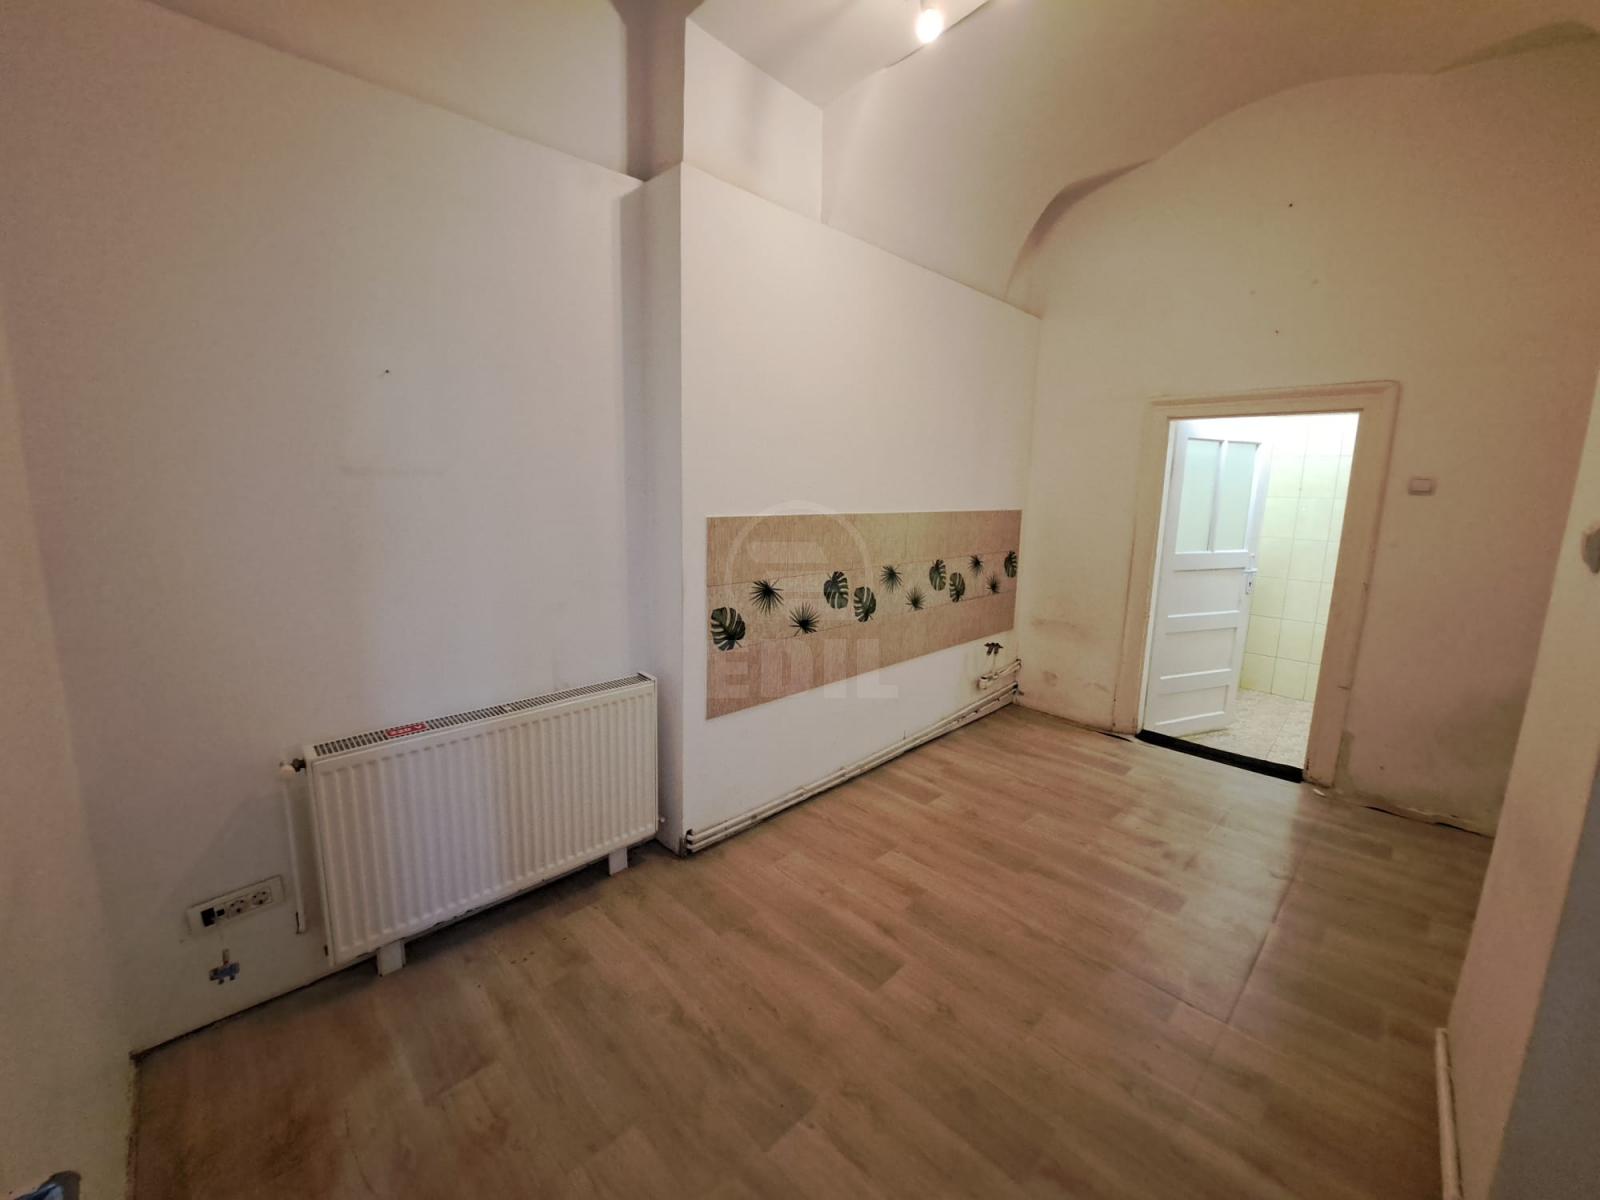 Rent Commercial space 2 Rooms CENTRAL-1